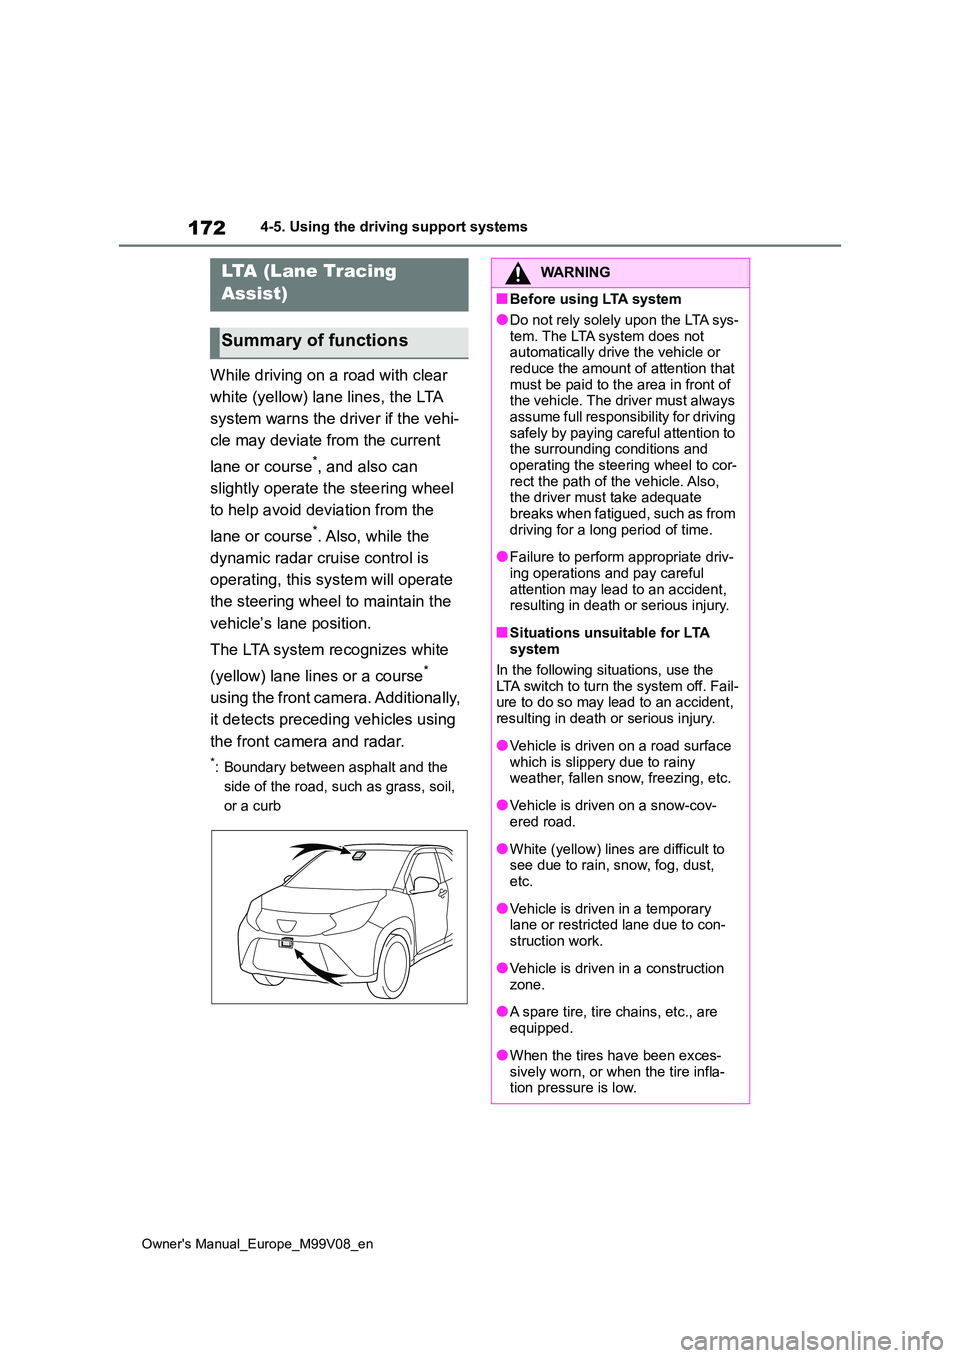 TOYOTA AYGO X 2022  Owners Manual (in English) 172
Owner's Manual_Europe_M99V08_en
4-5. Using the driving support systems
While driving on a road with clear  
white (yellow) lane lines, the LTA  
system warns the driver if the vehi- 
cle may d